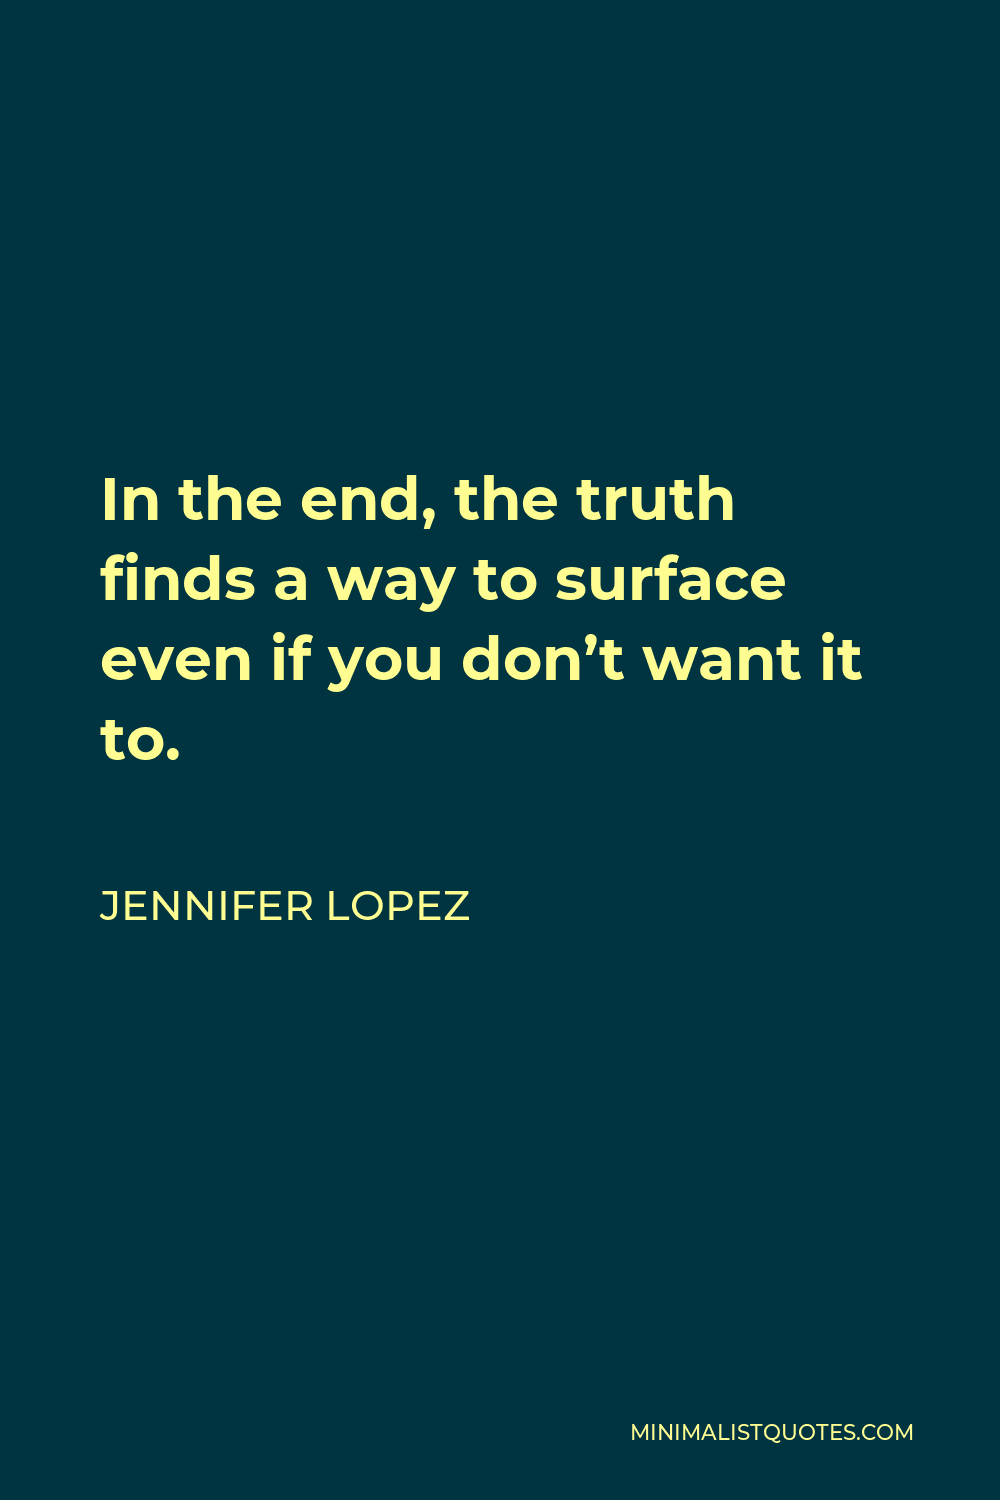 Jennifer Lopez Quote - In the end, the truth finds a way to surface even if you don’t want it to.